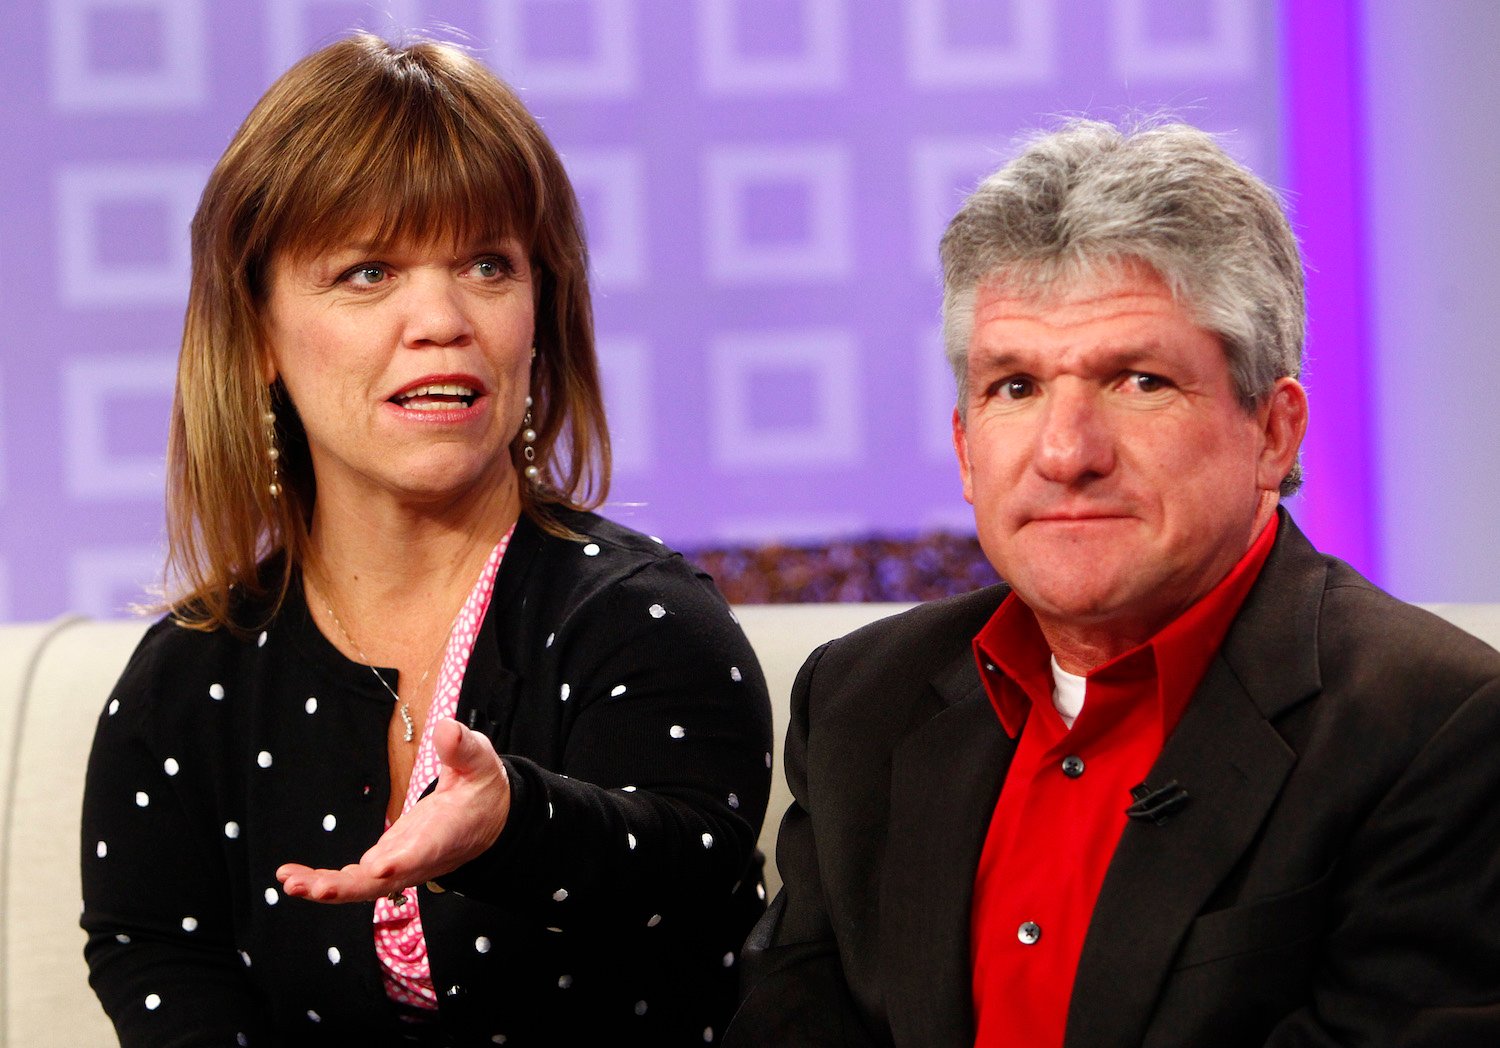 Amy Roloff and Matt Roloff from 'Little People, Big World' sitting next to each other against a purple background